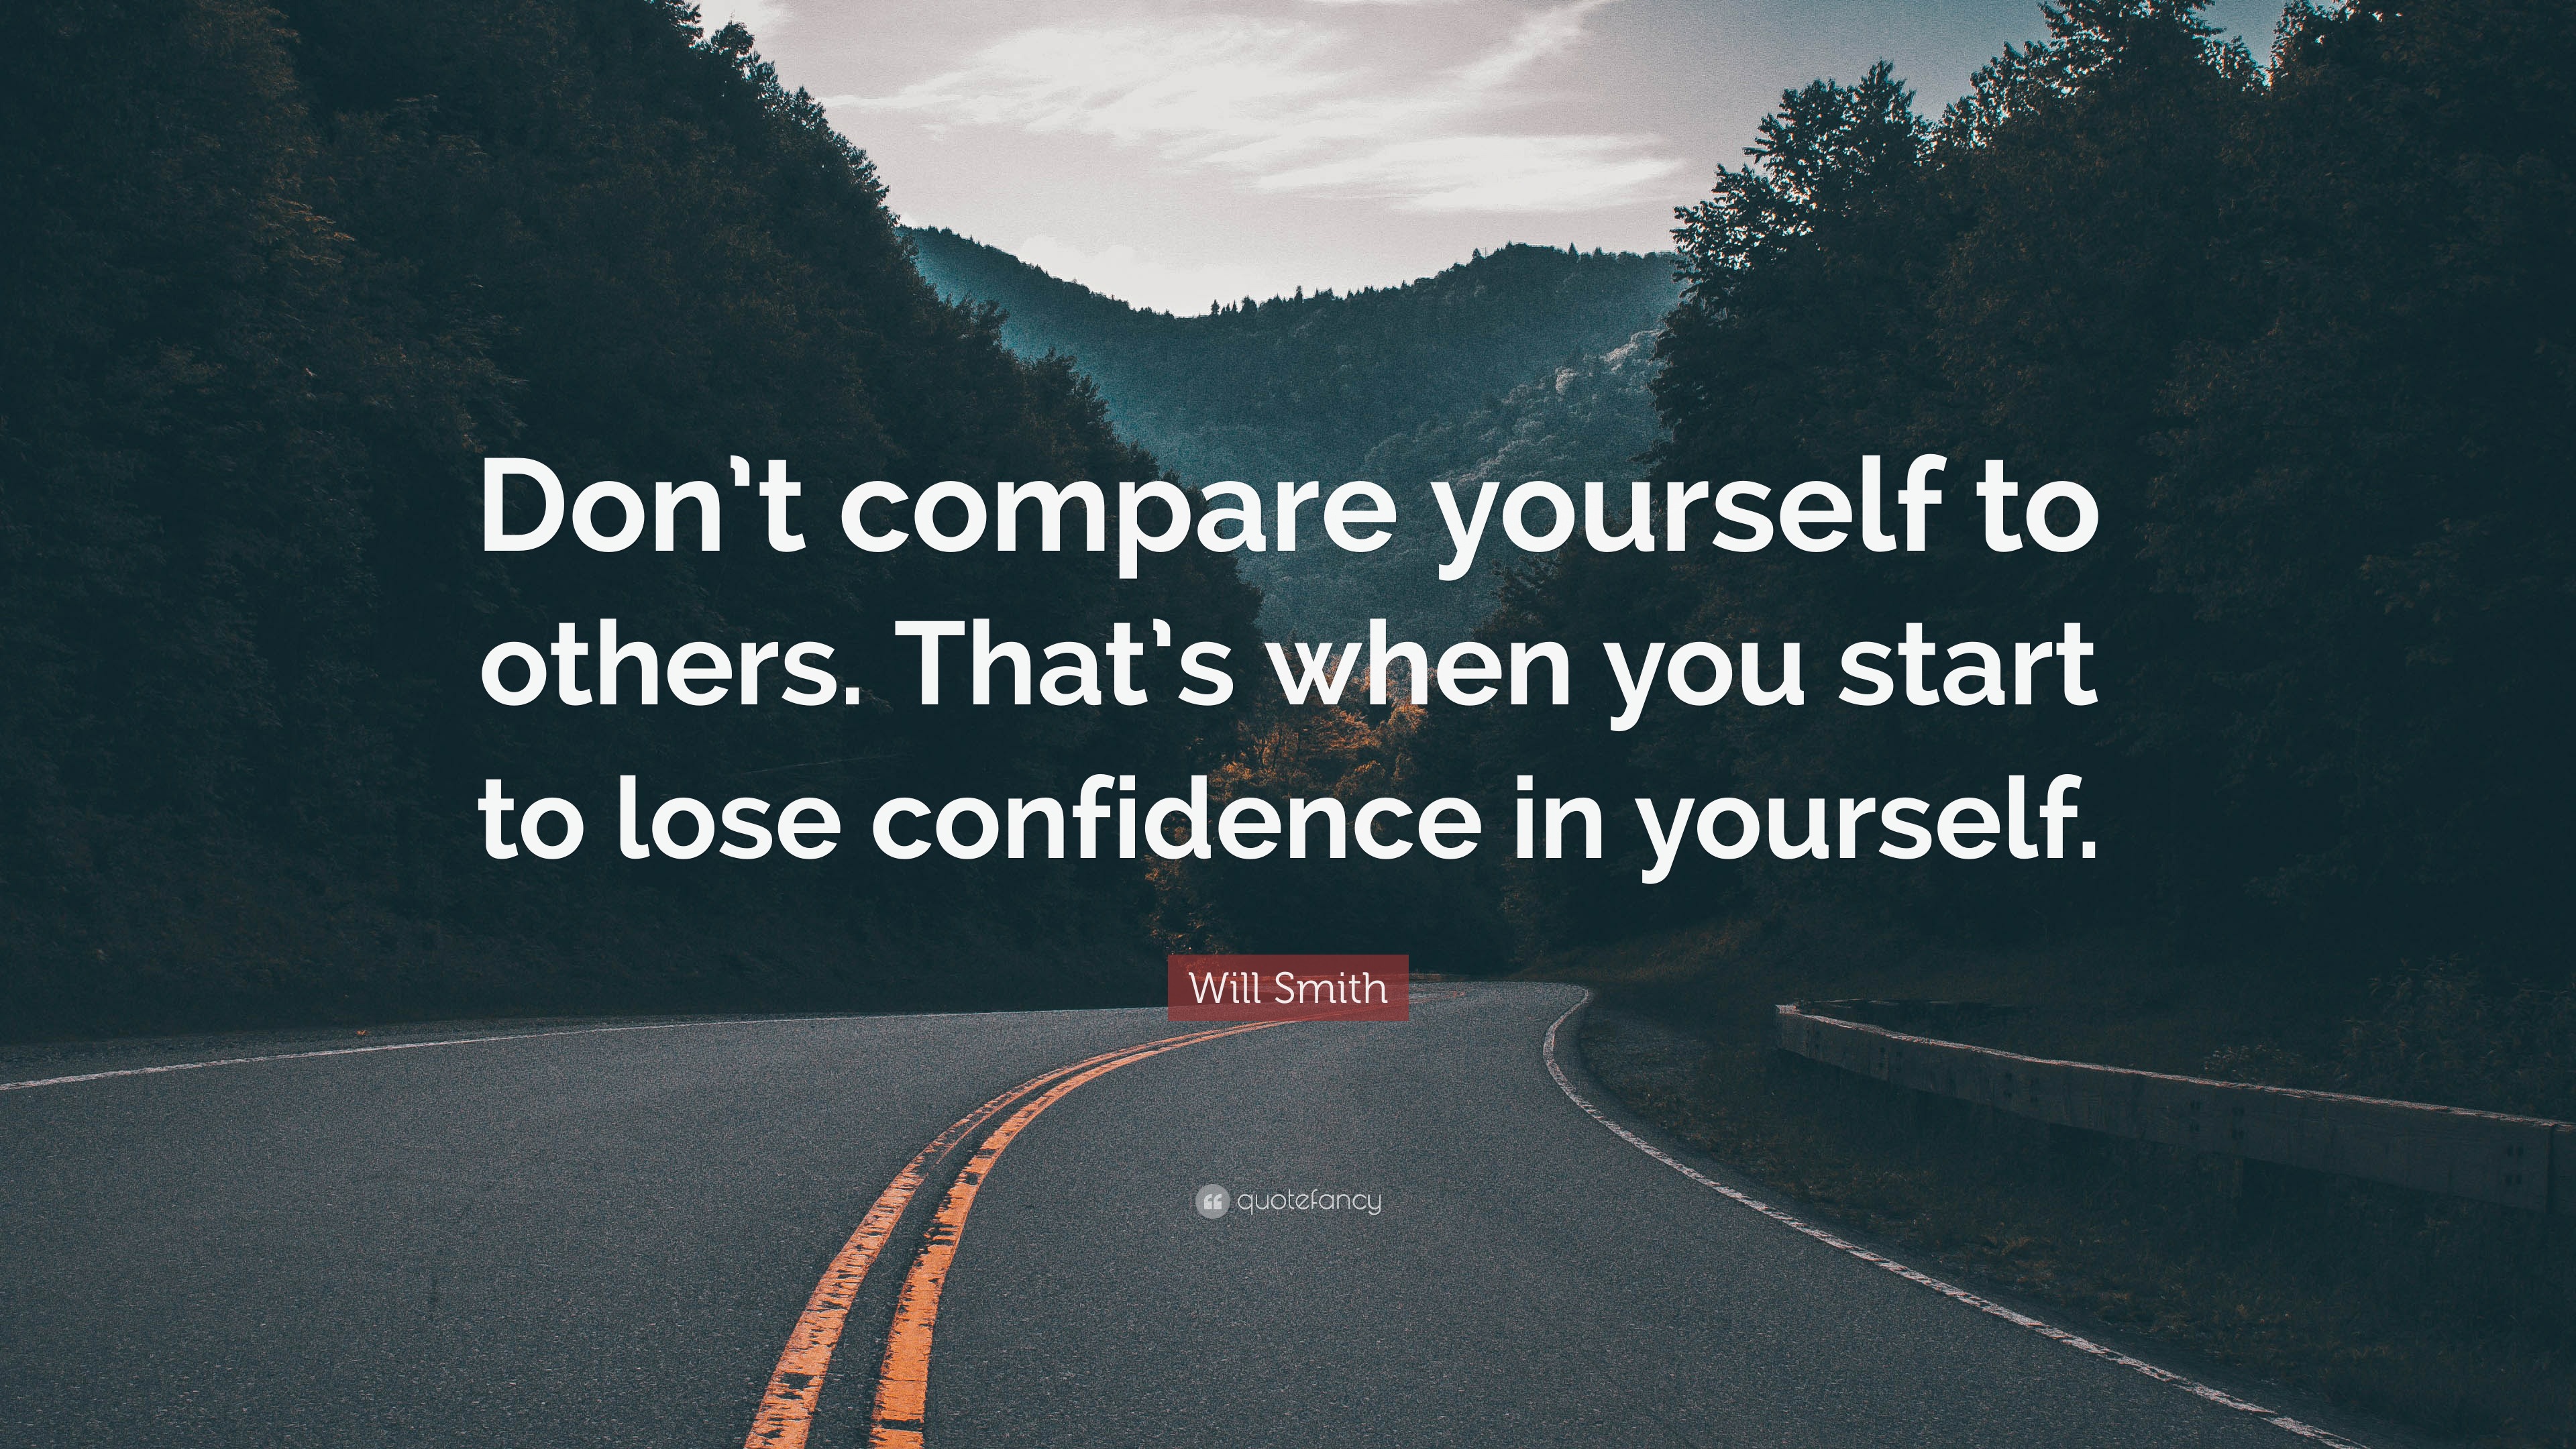 Will Smith Quote “Don’t compare yourself to others. That